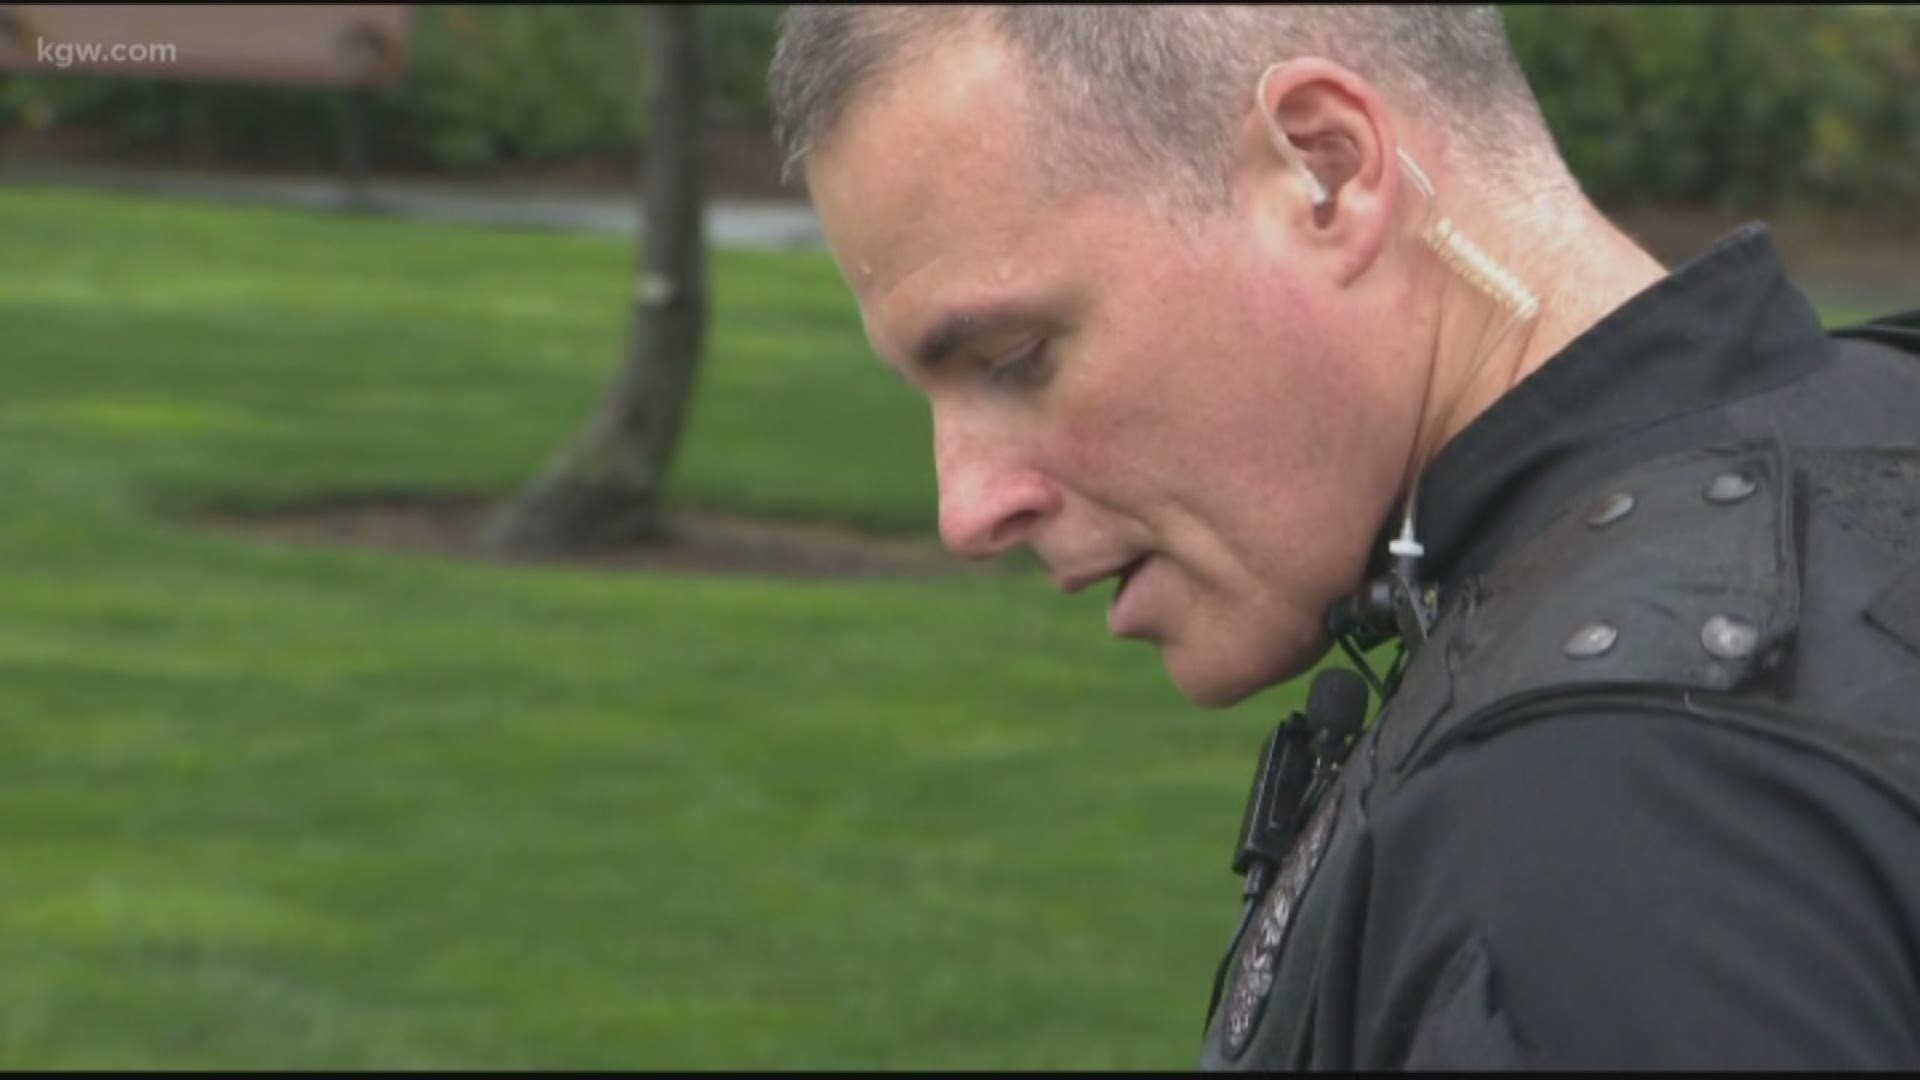 Vancouver Police said corporal Roger Evans has been with the department since 1998 and was promoted to corporal in December 2018.